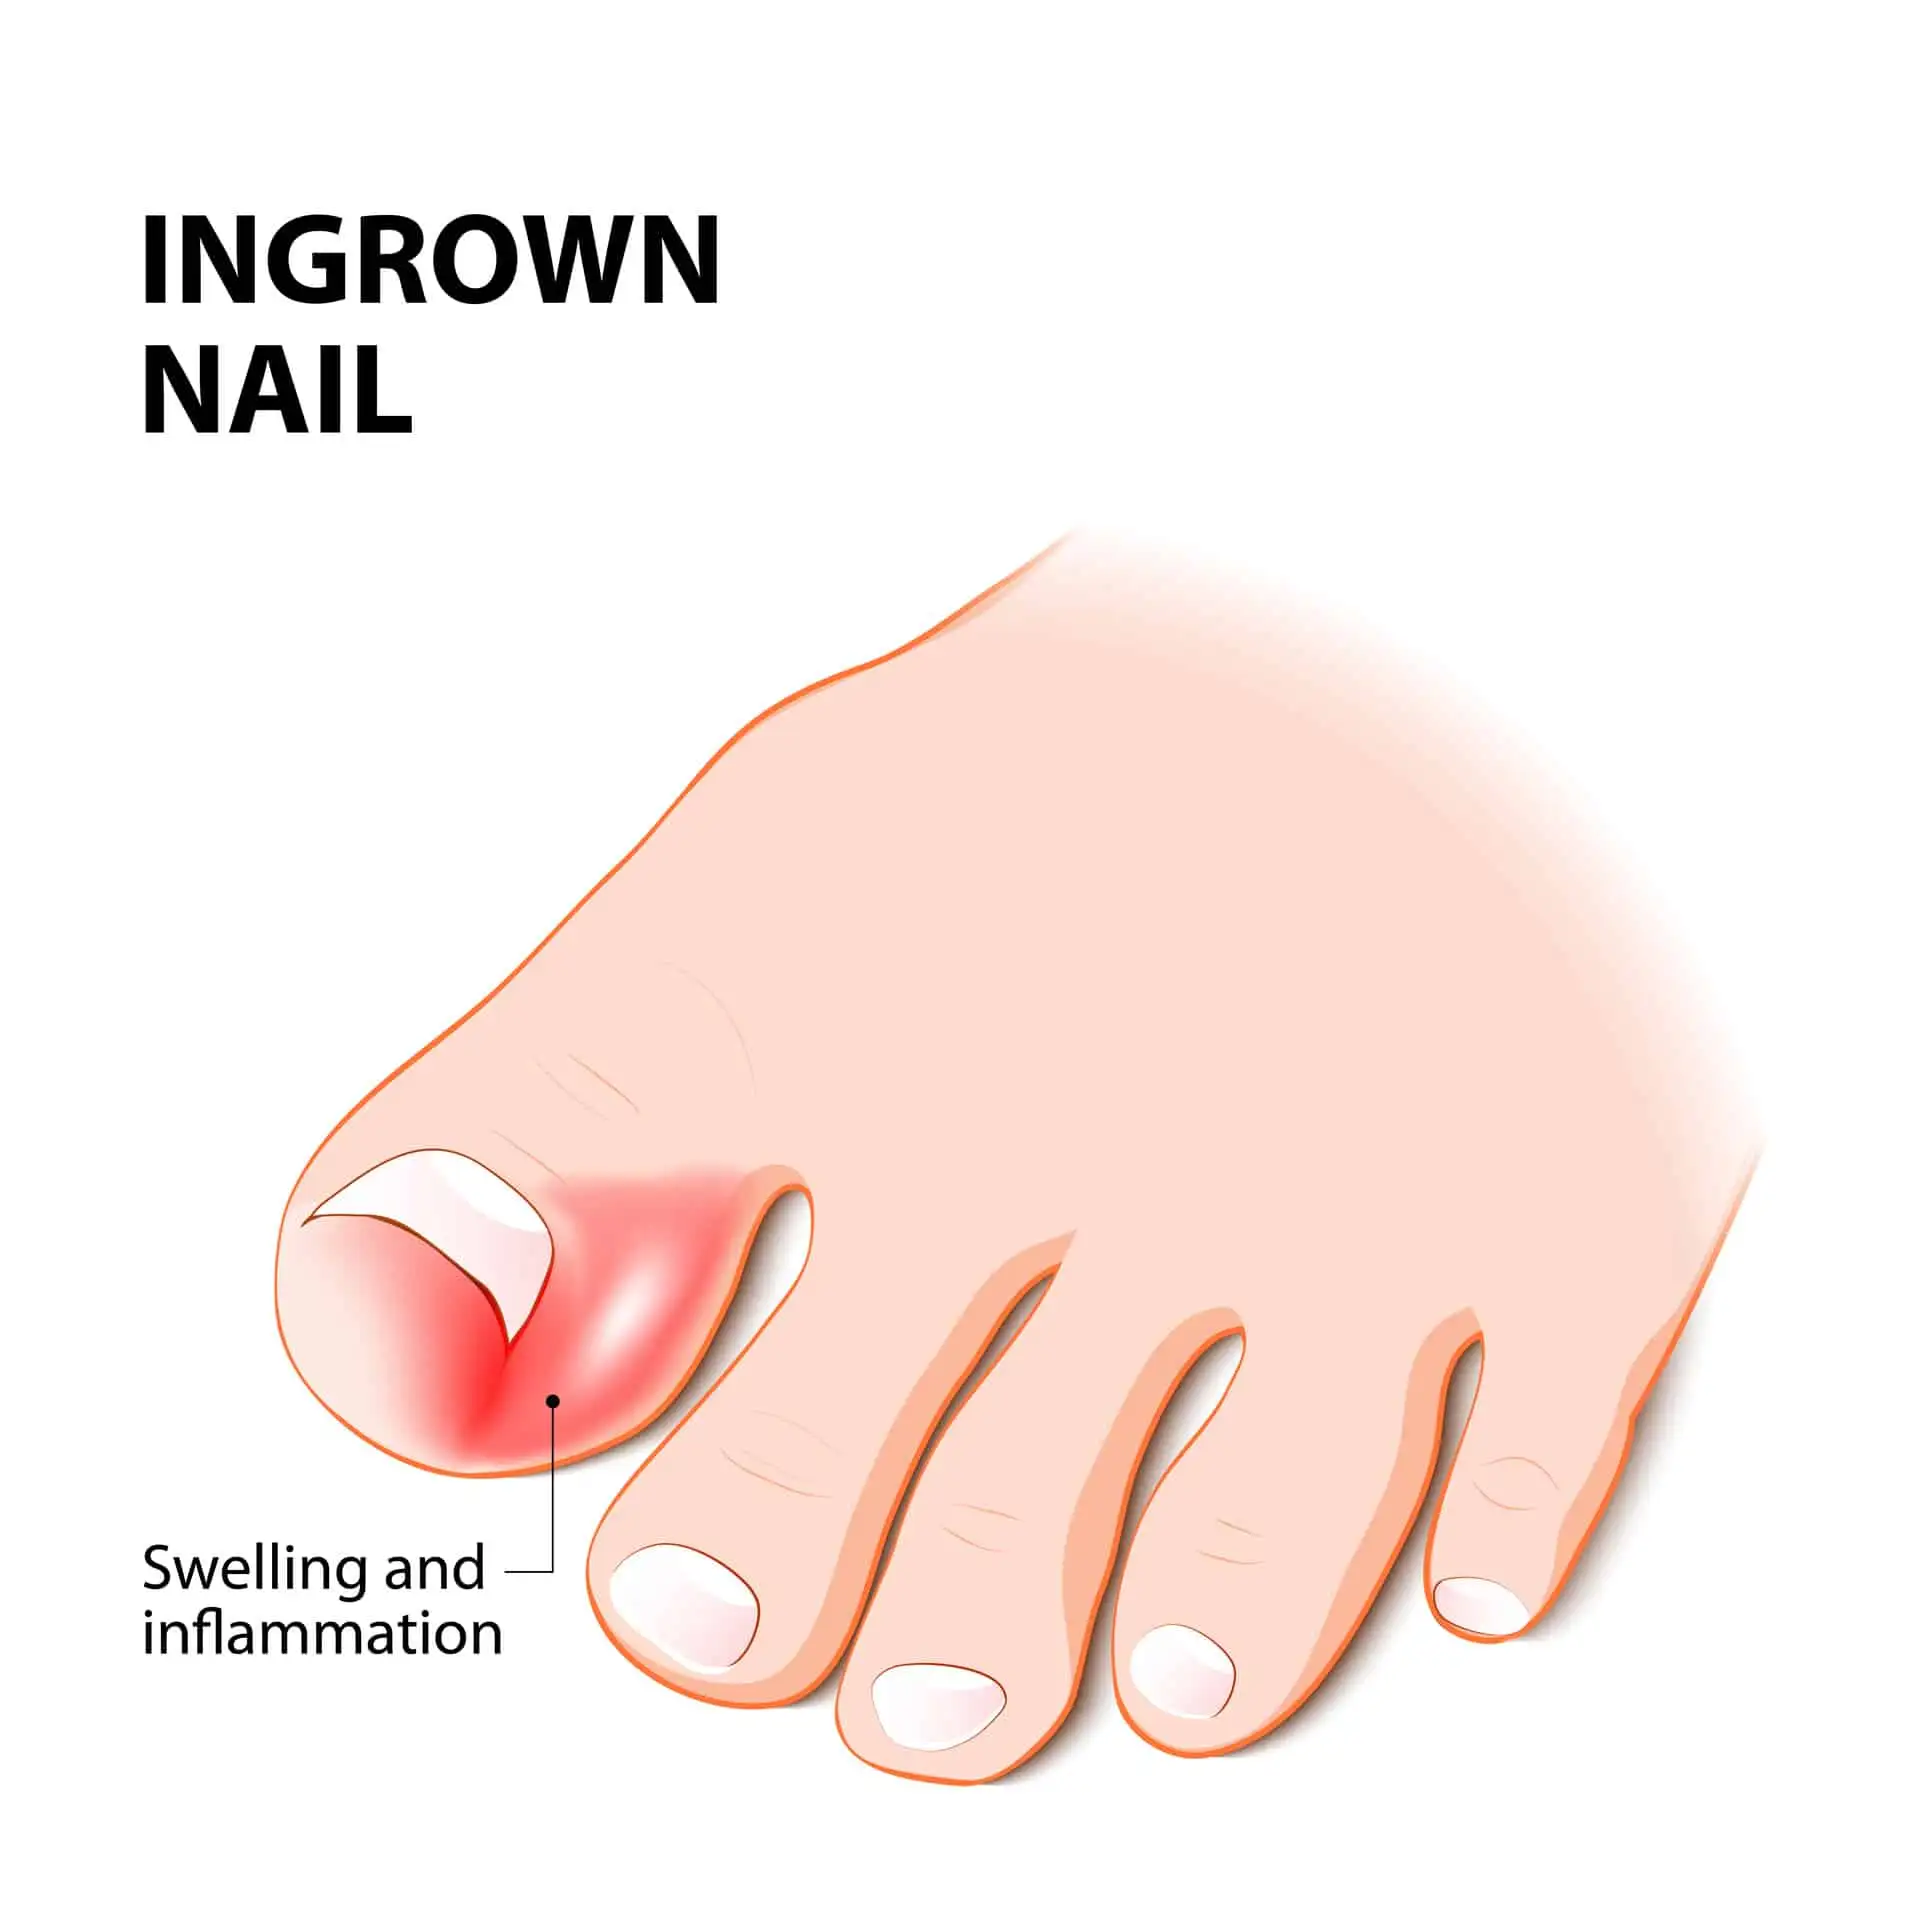 What Is The Fastest Way To Get Rid Of An Ingrown Toenail? Toe nail treatment